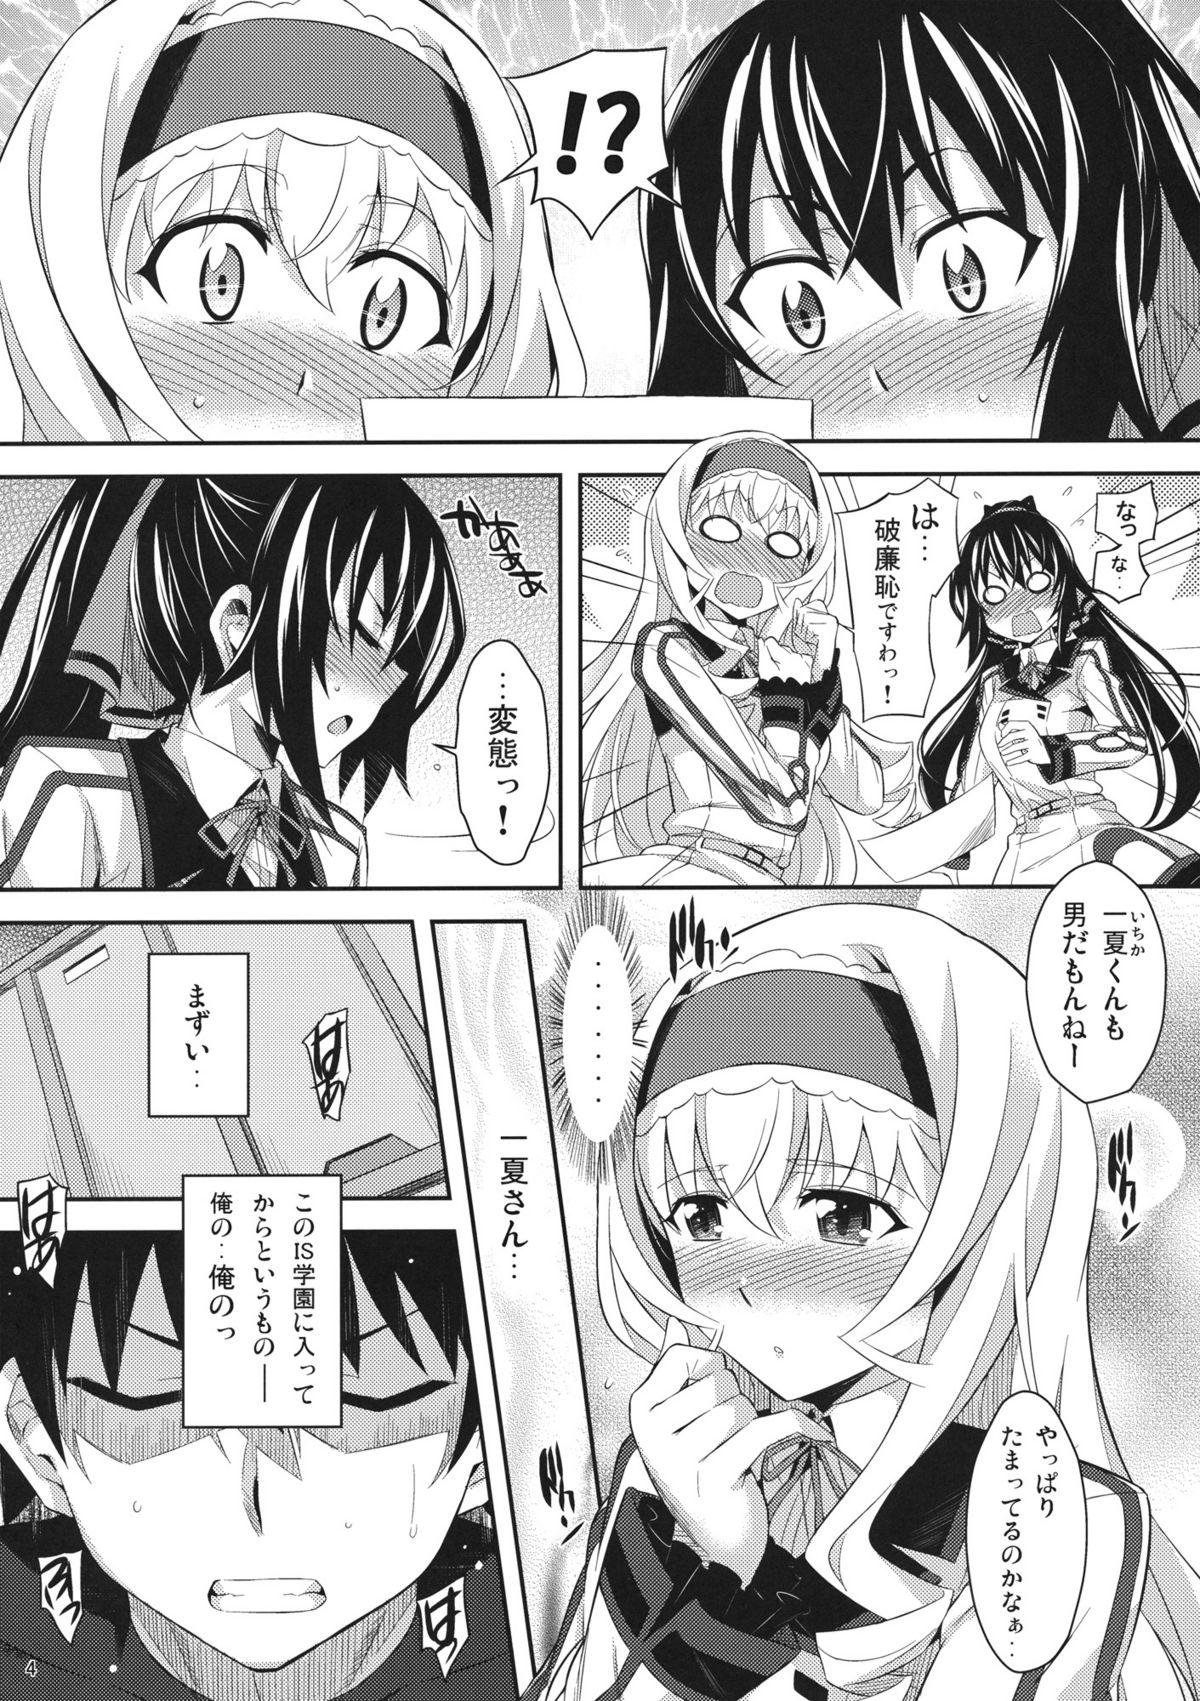 Bus Into Shower - Infinite stratos Leche - Page 3